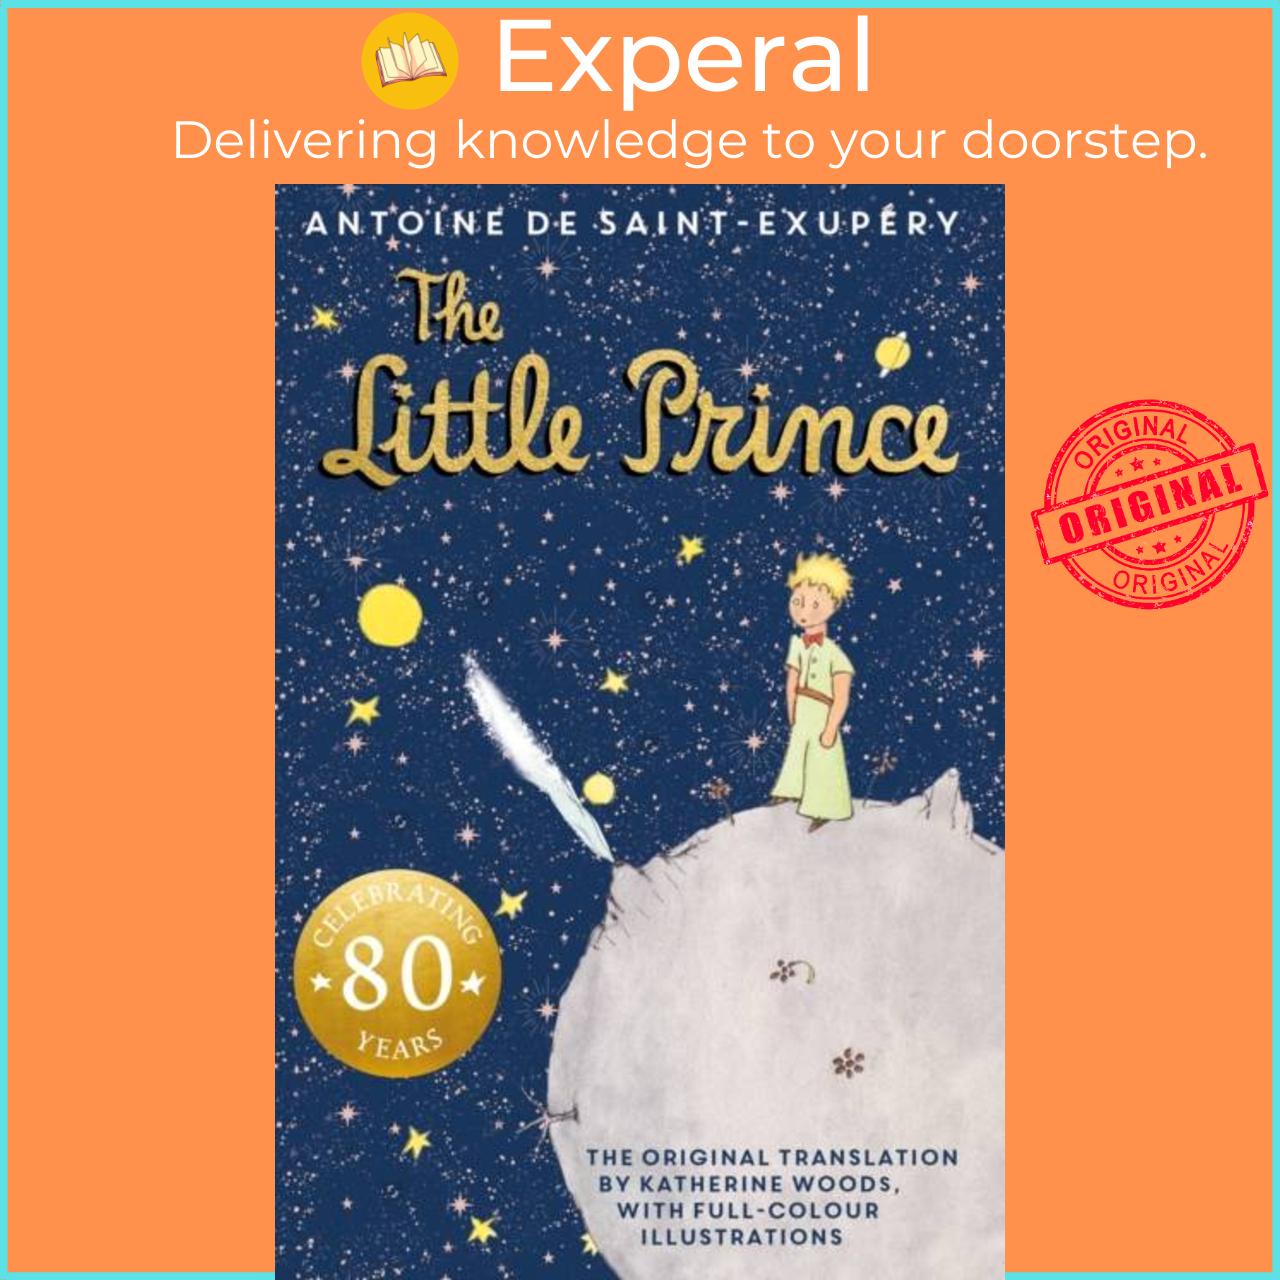 Sách - The Little Prince by Katherine Woods (UK edition, hardcover)